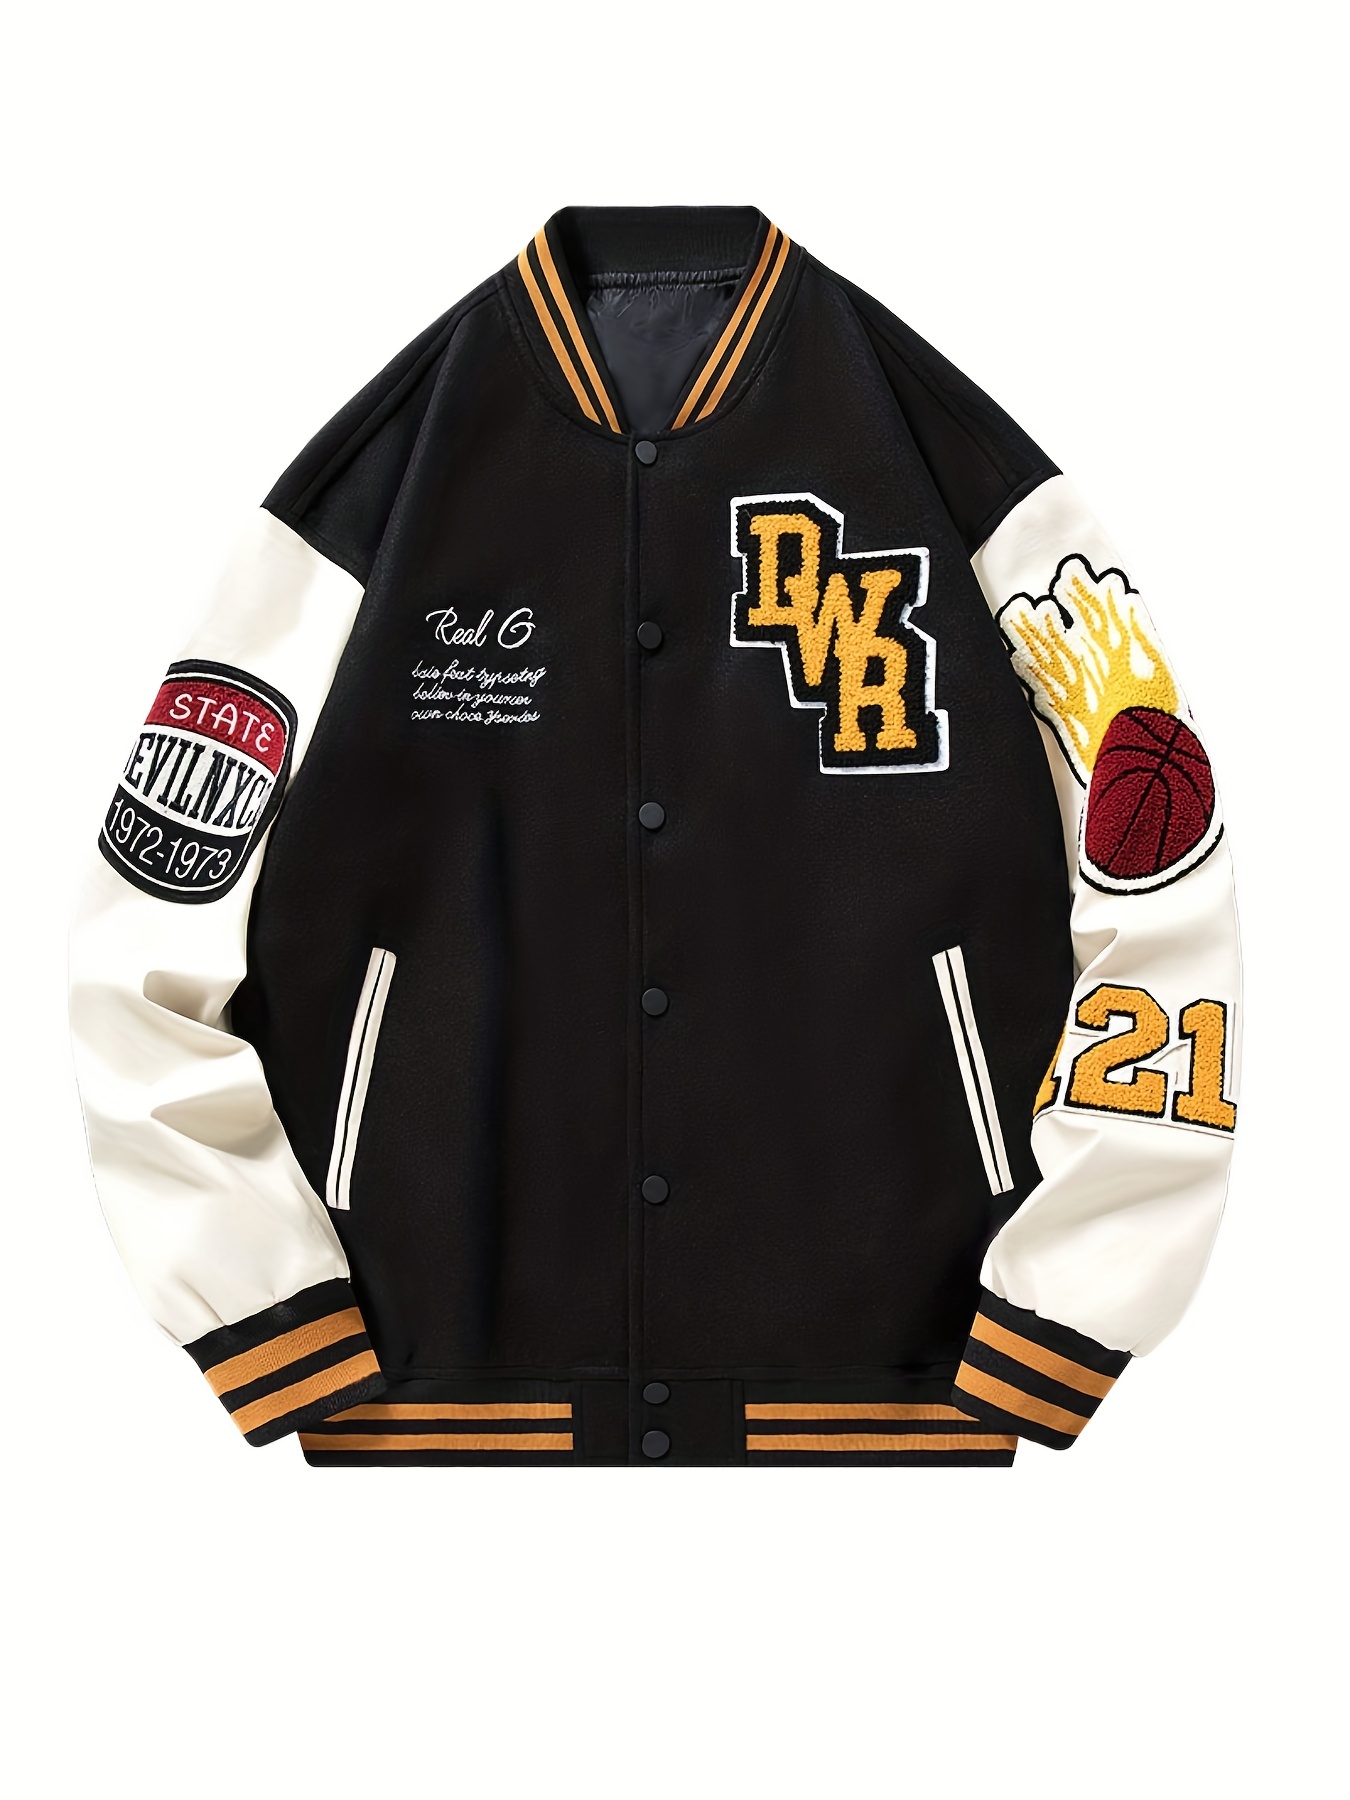 Vintage Style Embroidery Letter Print Varsity Jacket, Men's Casual